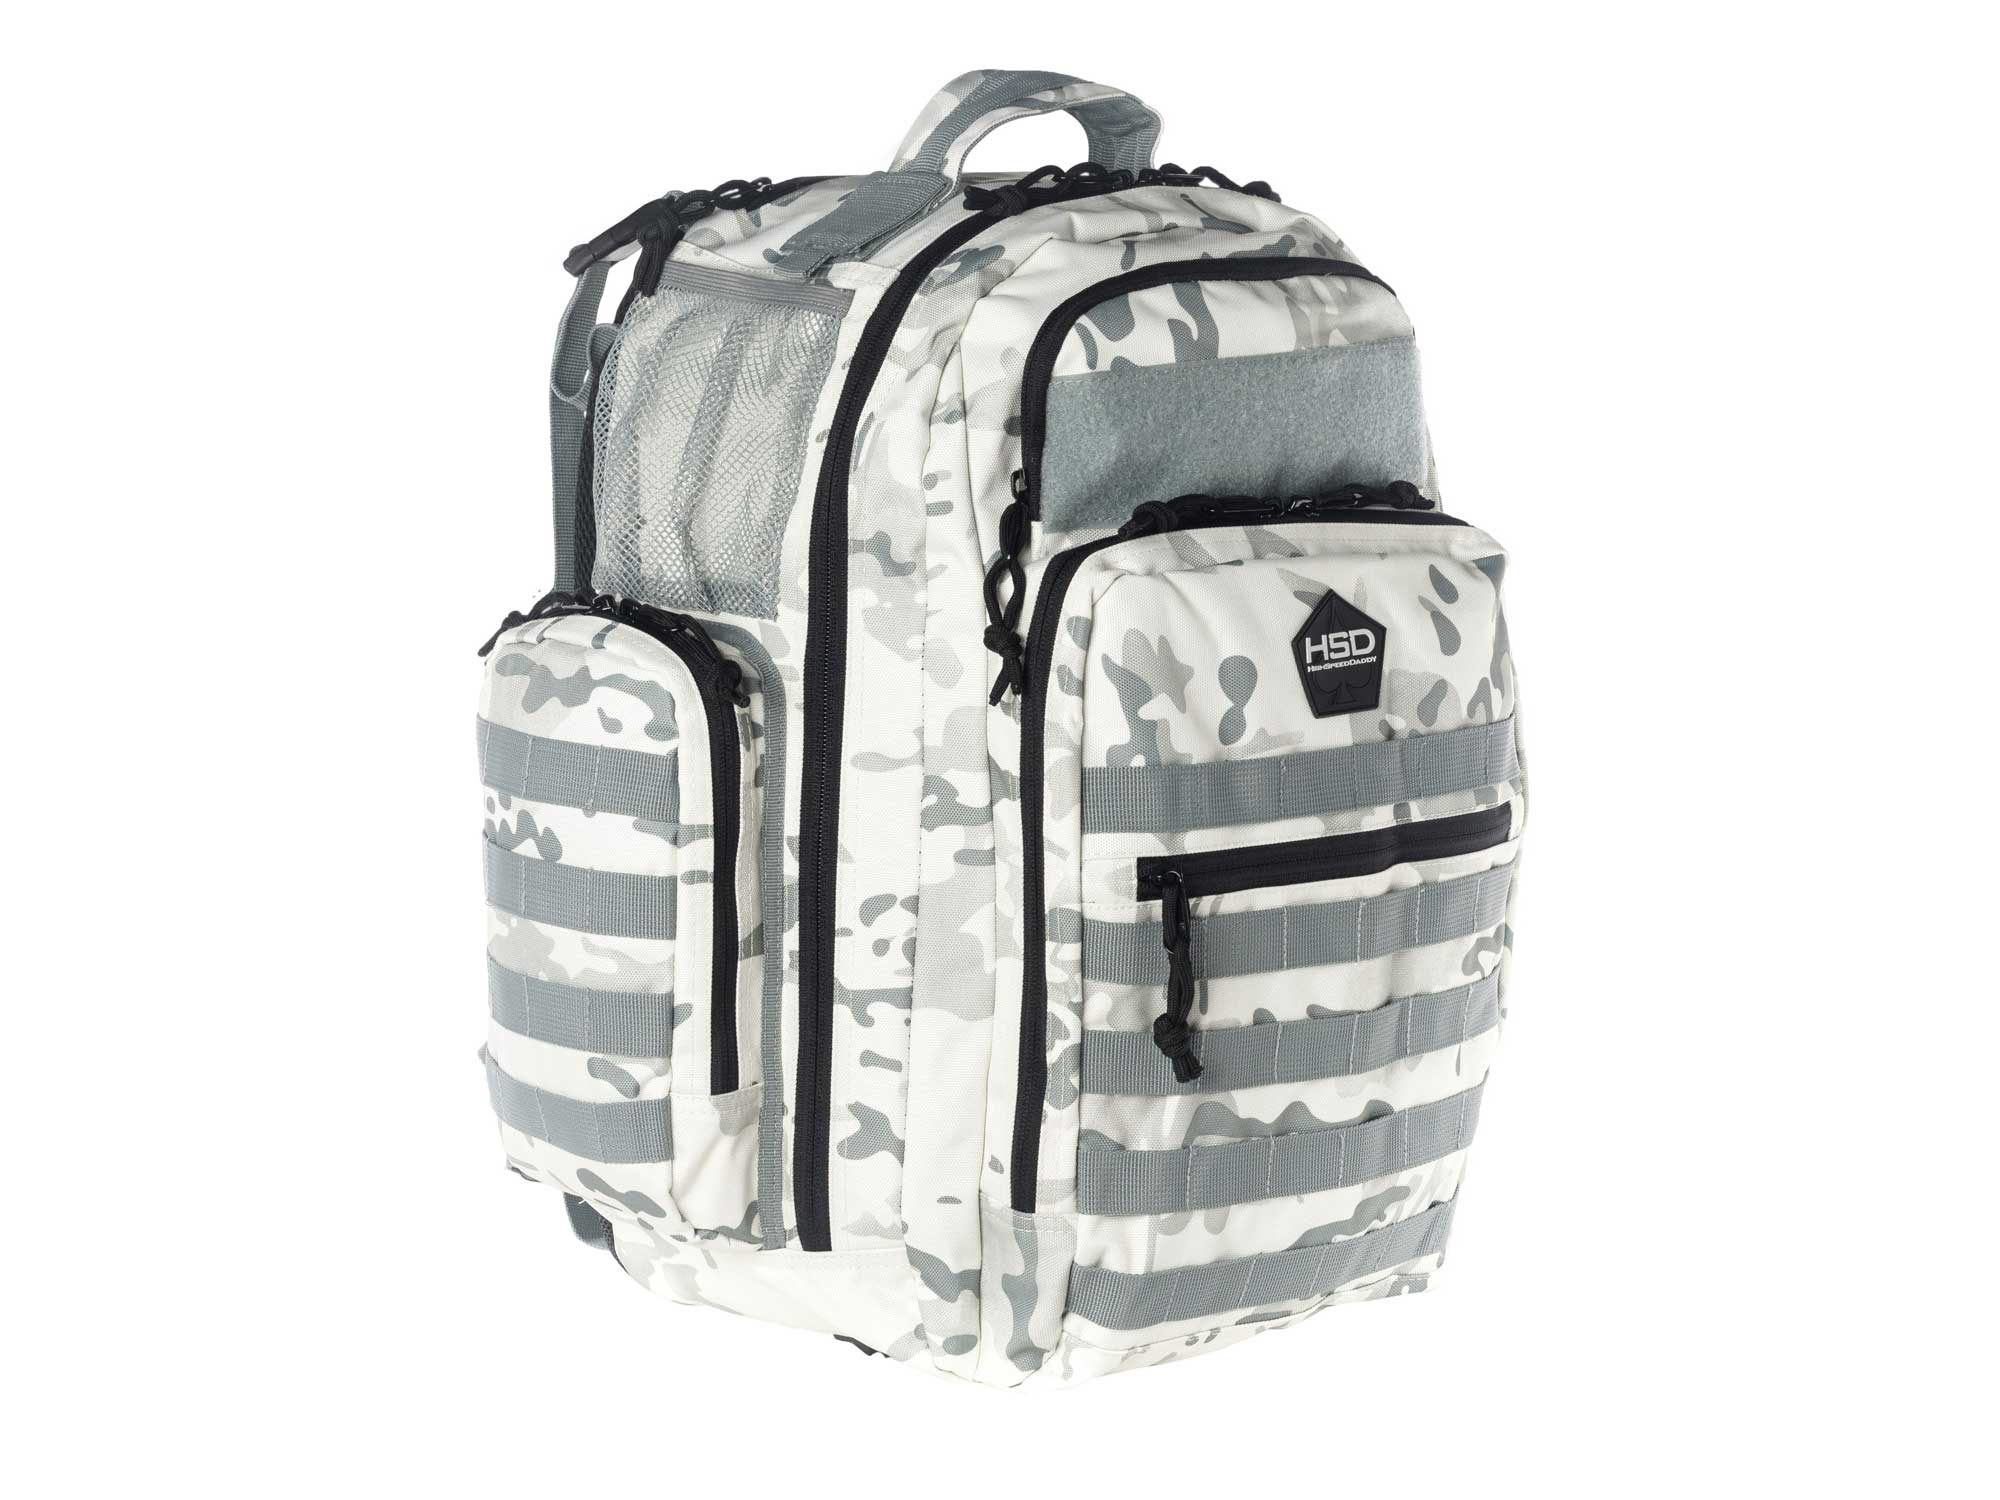 The New High Speed Daddy Snow Camo Diaper Bag Backpack Is Here!